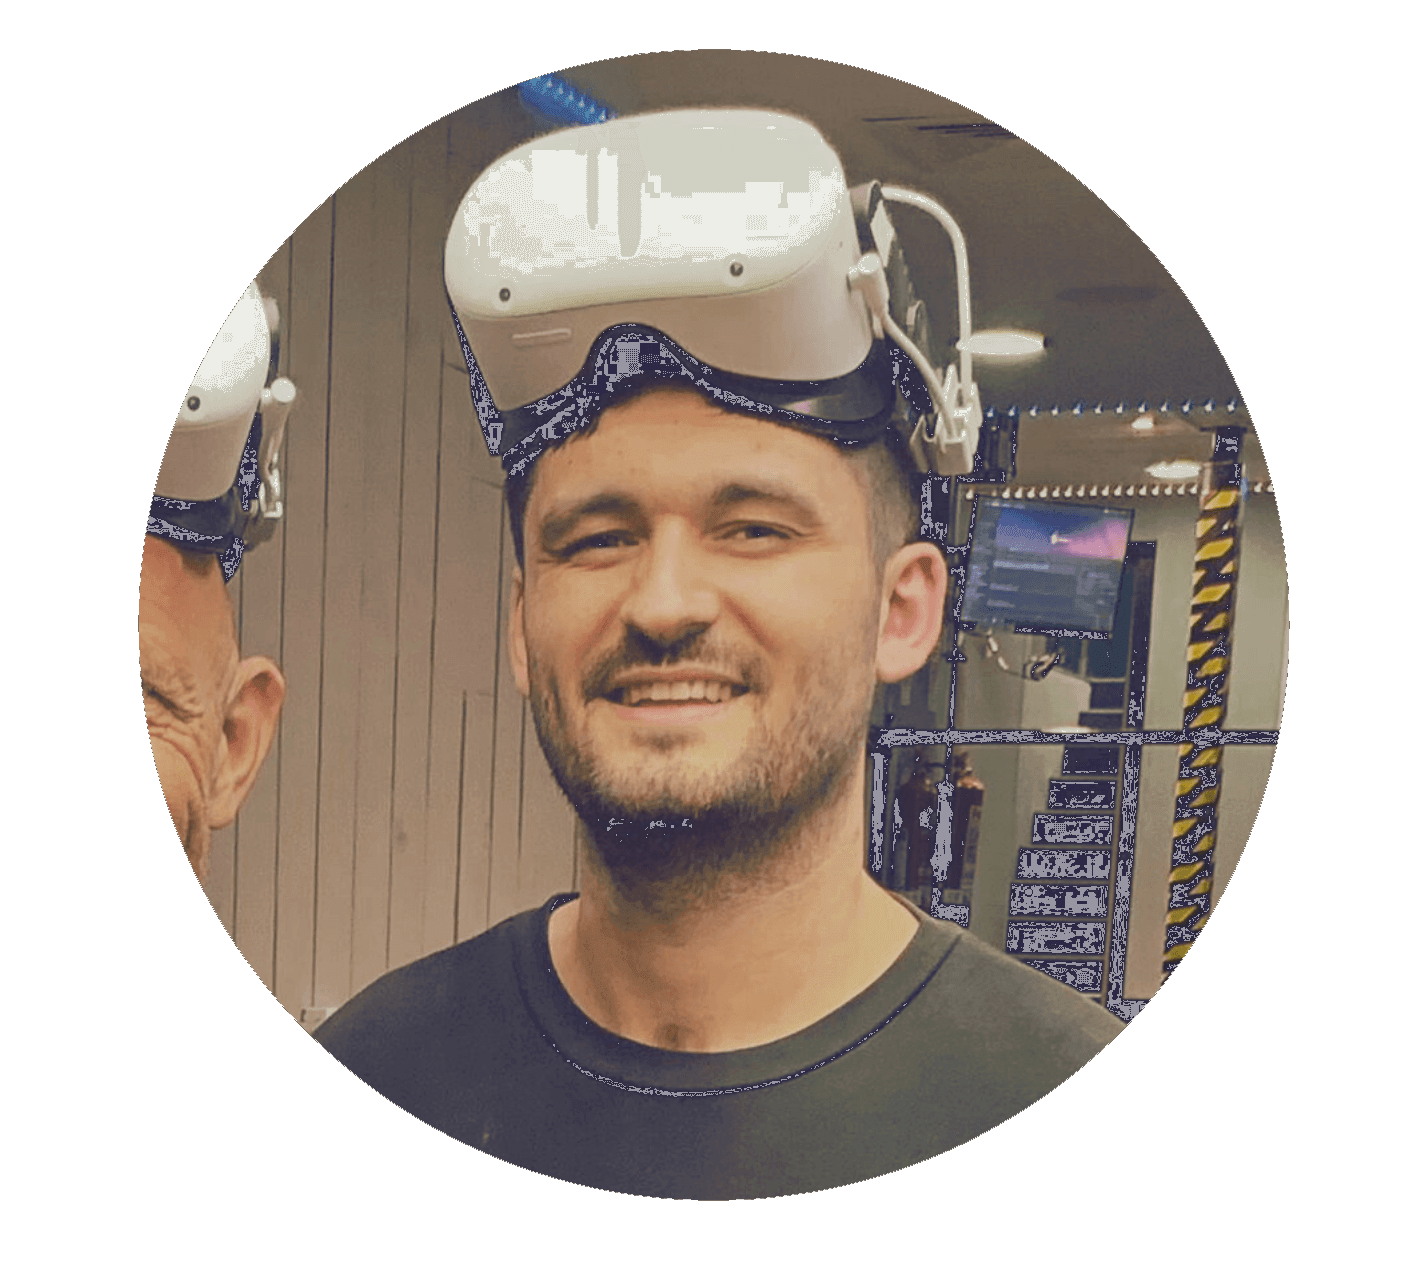 Kieran - Venue Engineer, Operations Manager, VR Consultant